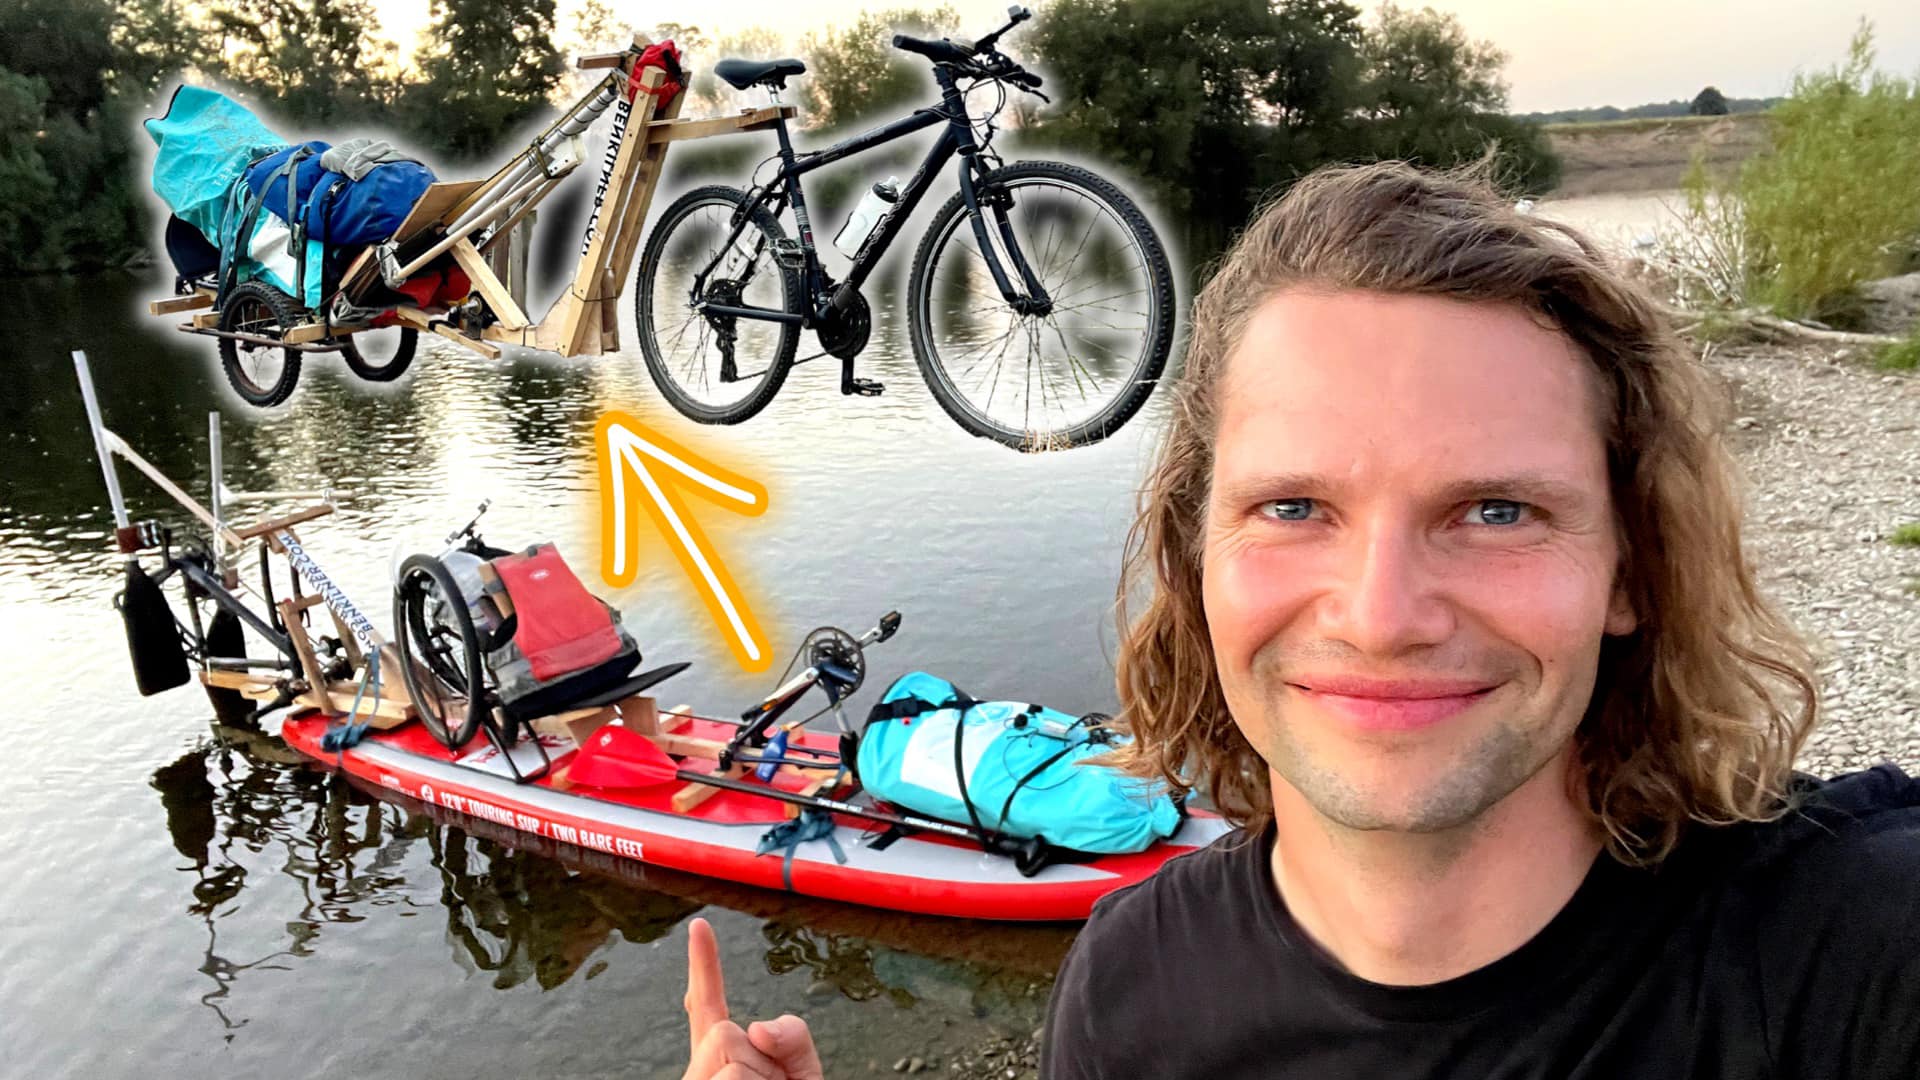 https://s1.cdn.autoevolution.com/images/news/gallery/world-s-first-amphibious-pedal-paddle-recumbent-bike-boat-takes-epic-150-mile-journey_2.jpg